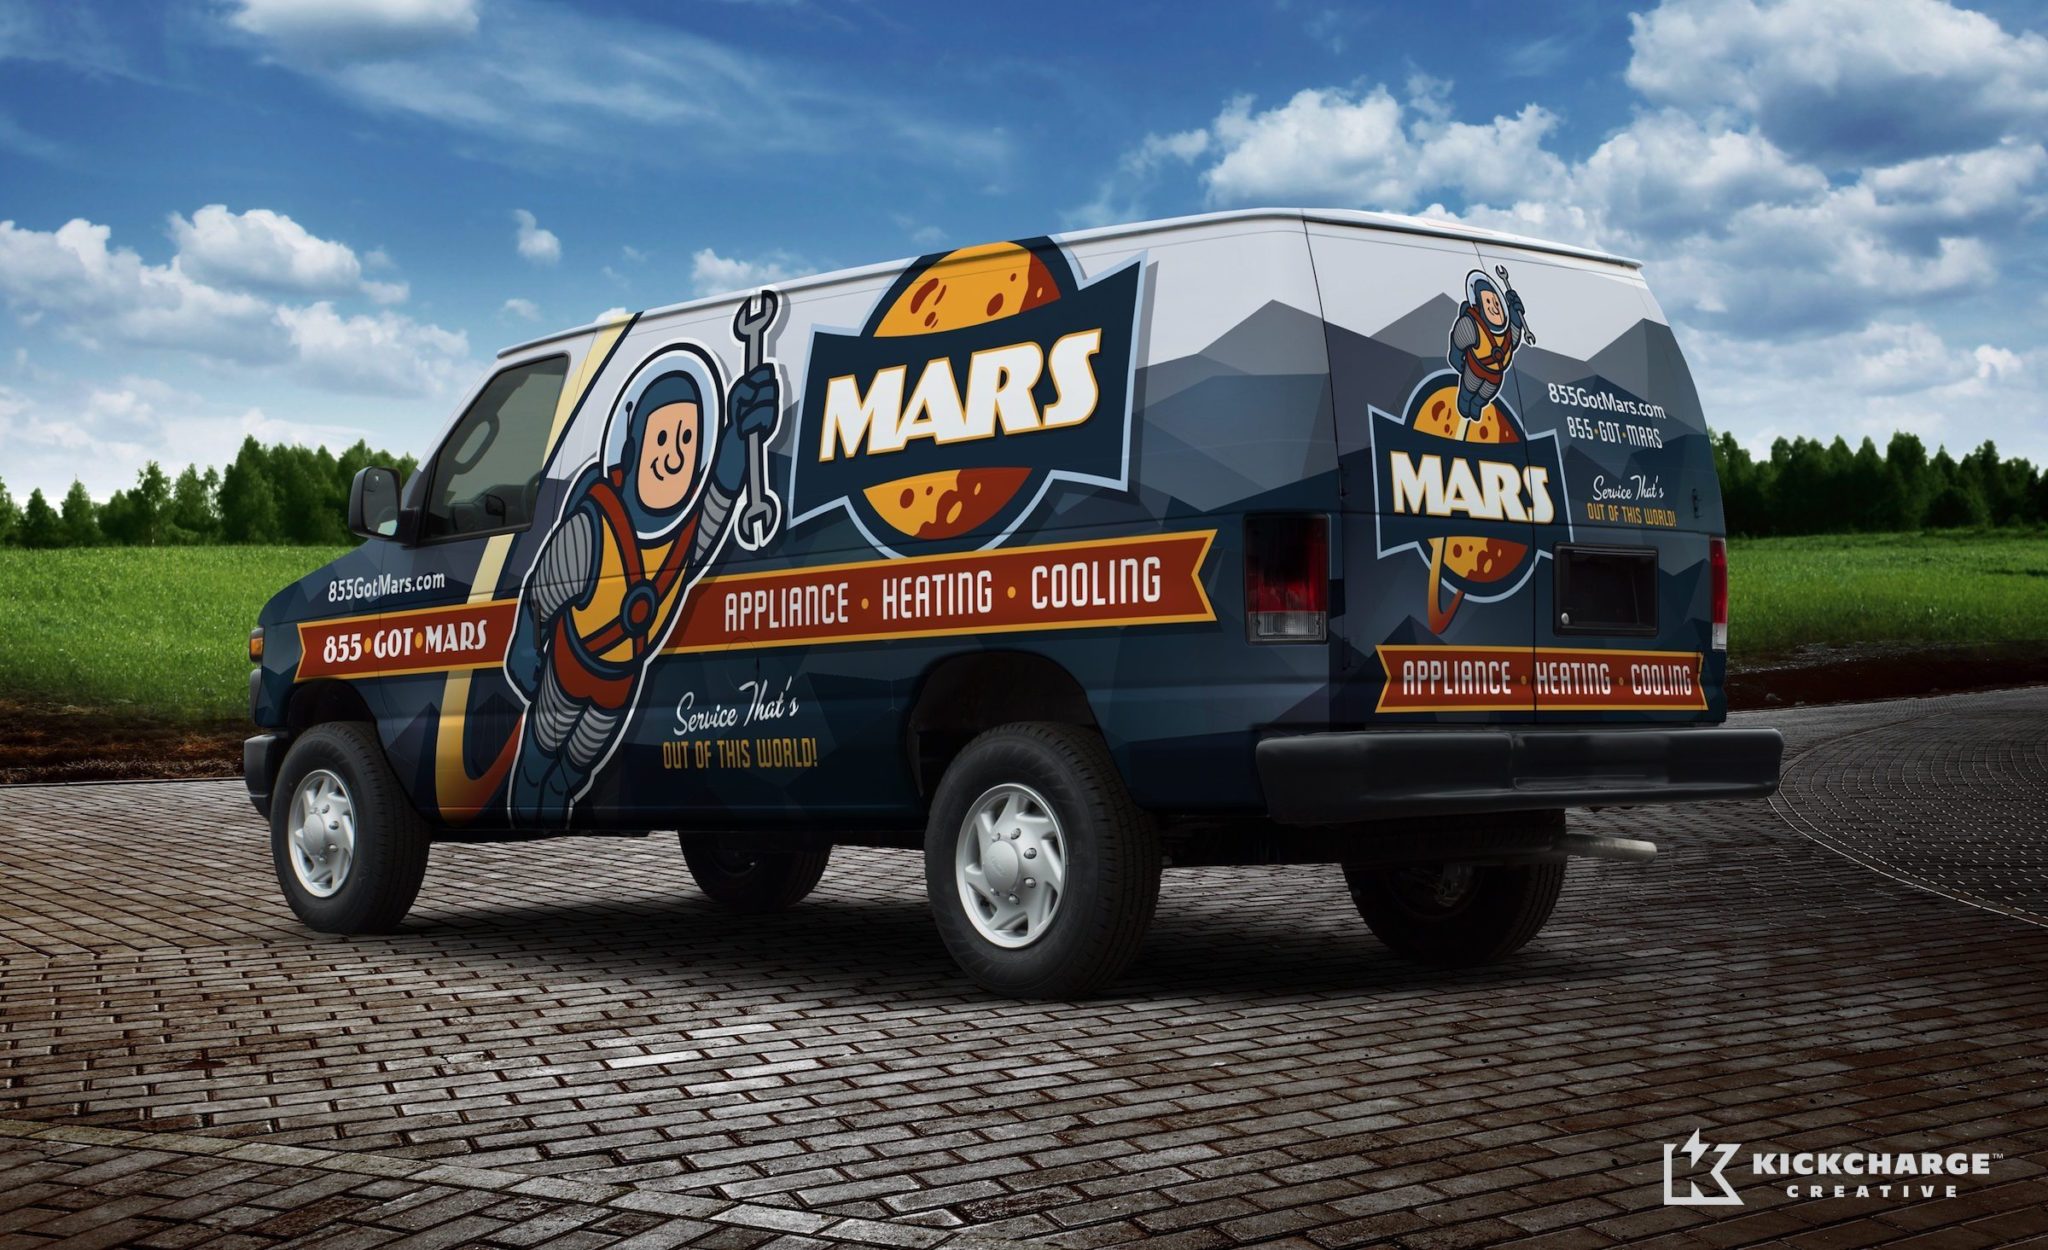 This vehicle wrap design for an appliance repair and HVAC business in Tennessee is out of this world.